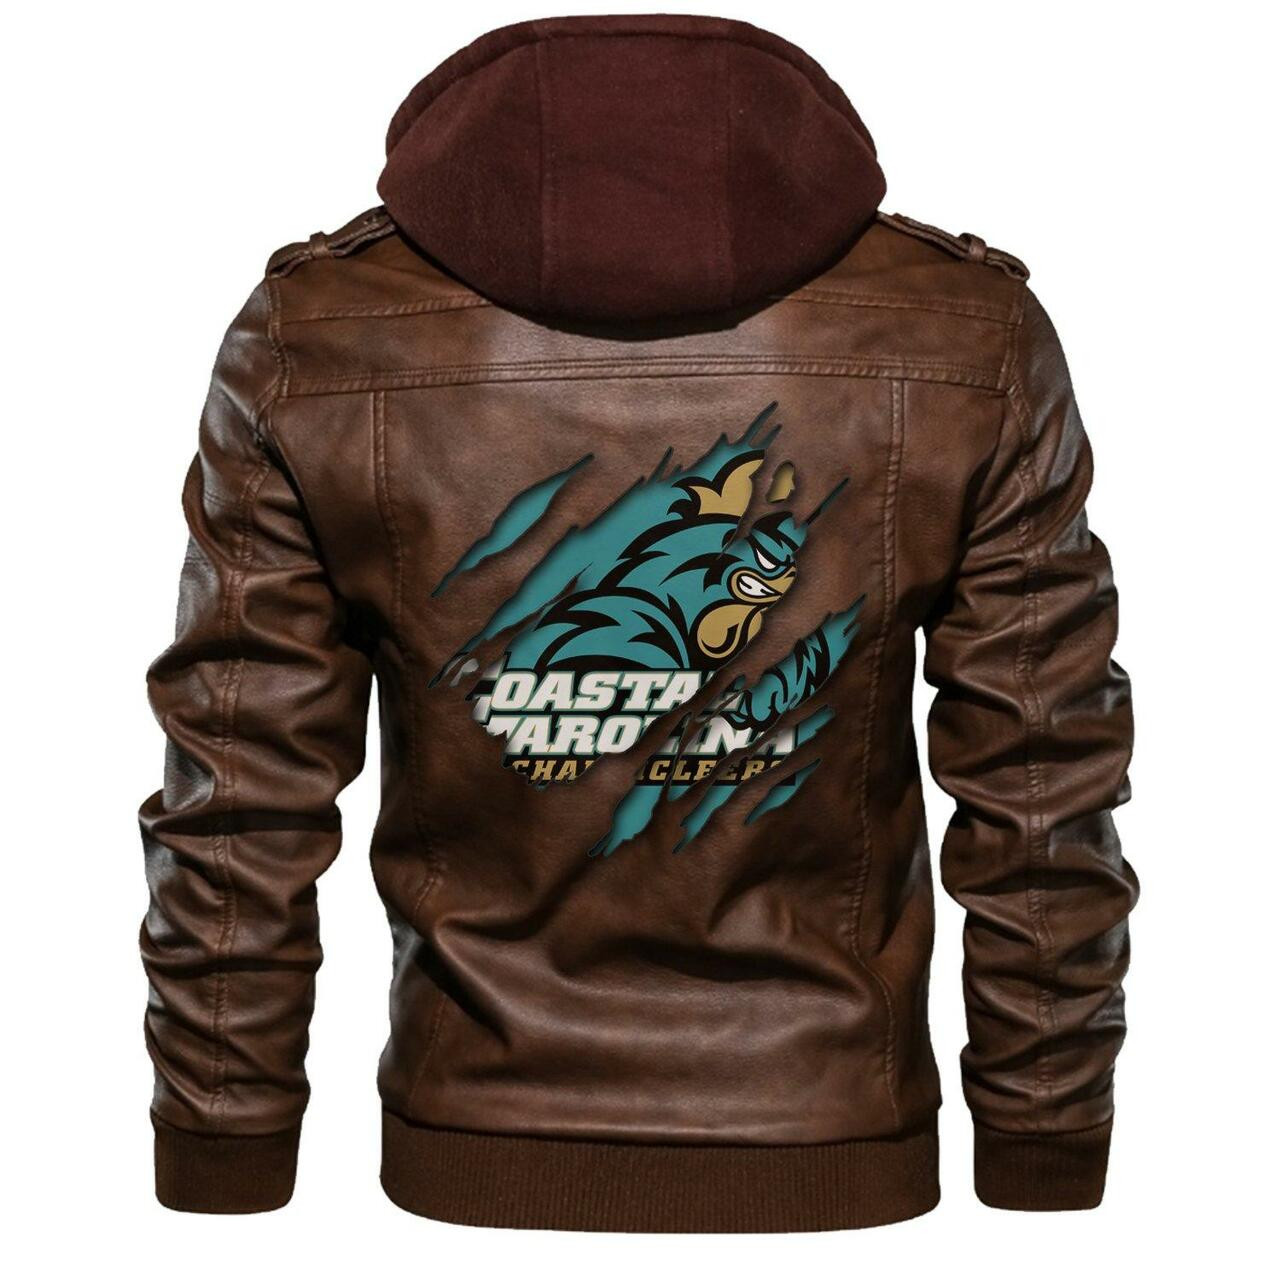 Check out and find the right leather jacket below 24